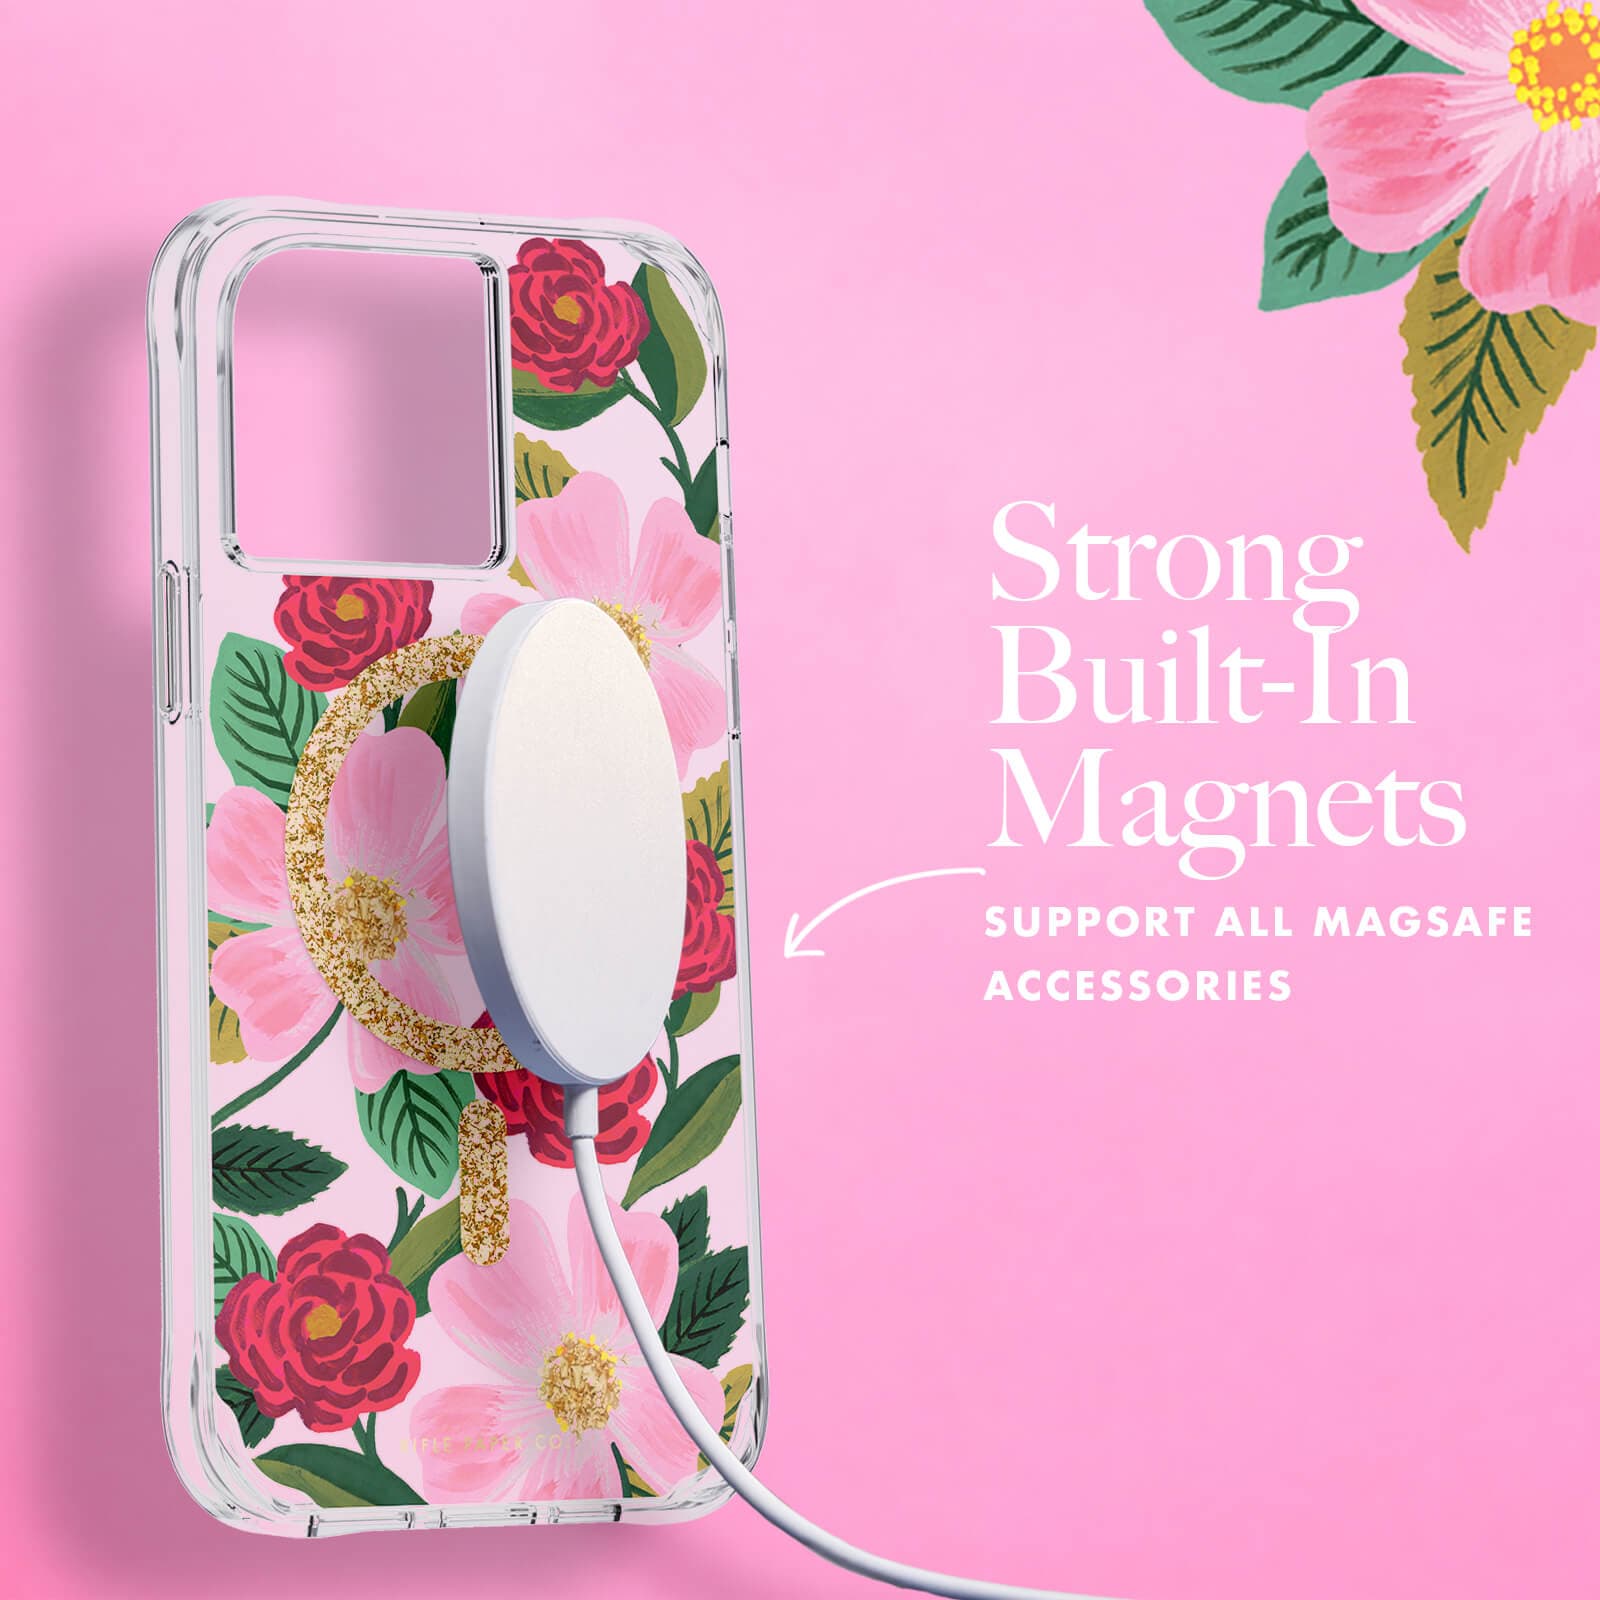 Strong built-in magnets support all MagSafe accessories. color::Rose Garden